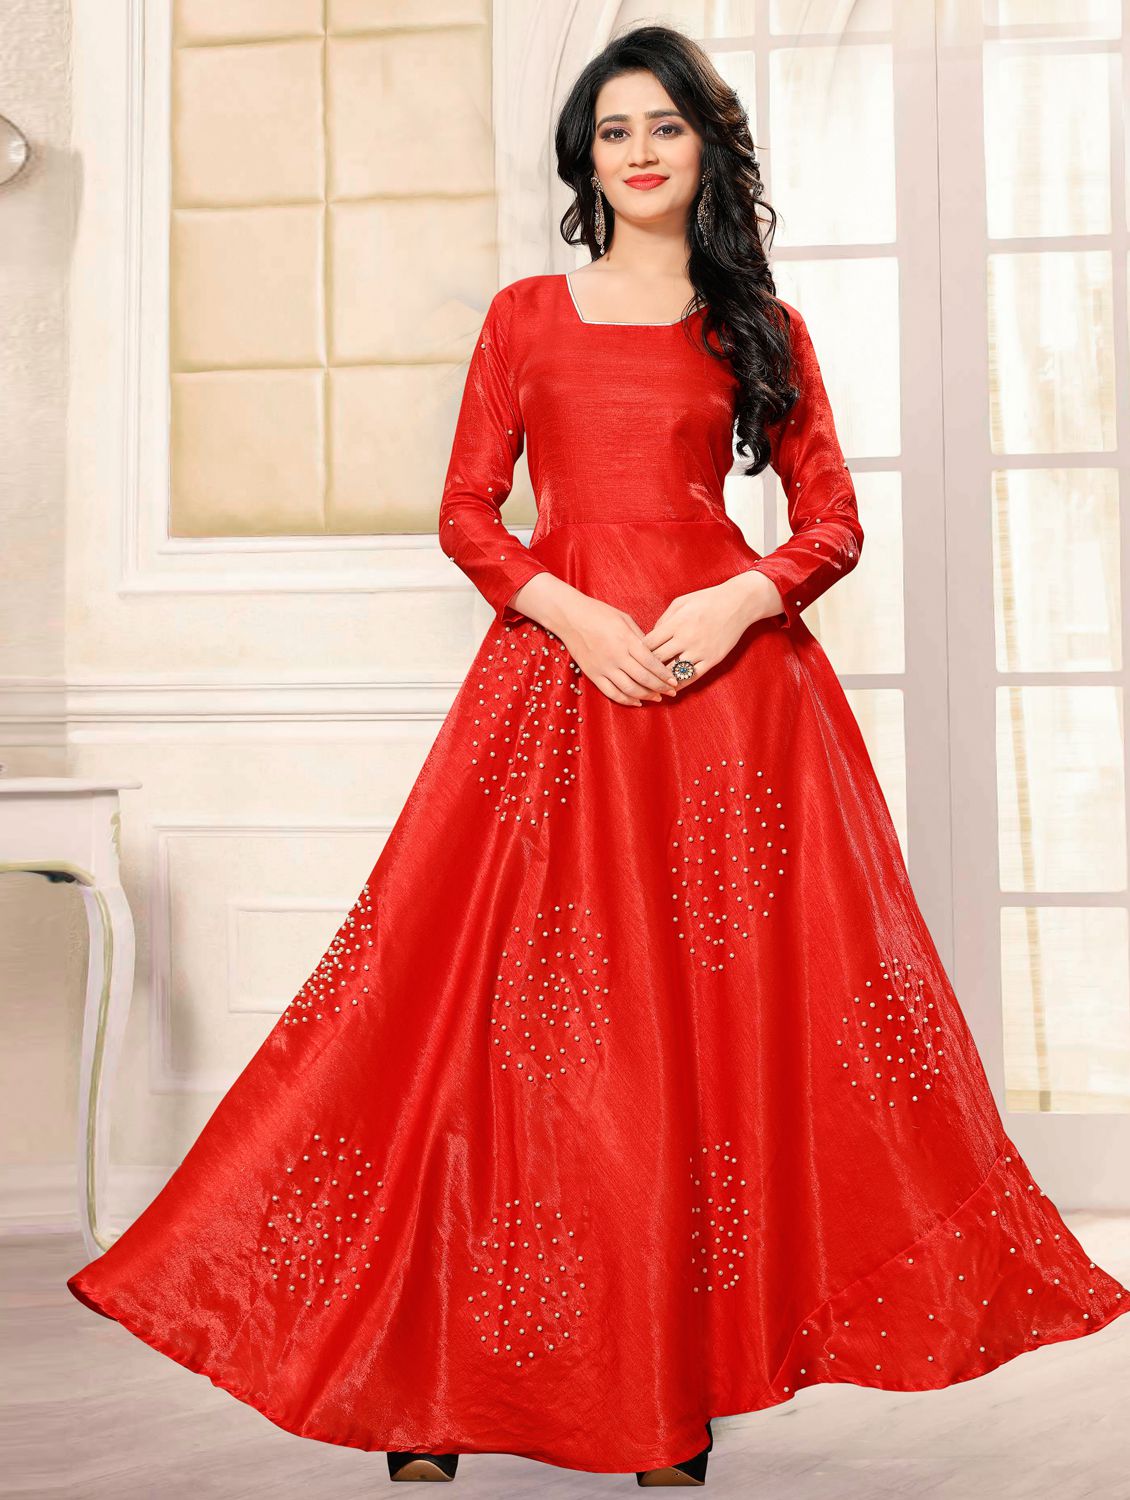 Yogi Fashion Multi Color Pure Georgette Embroidered Anarkali Dress Material   Buy Yogi Fashion Multi Color Pure Georgette Embroidered Anarkali Dress  Material Online at Best Prices in India on Snapdeal